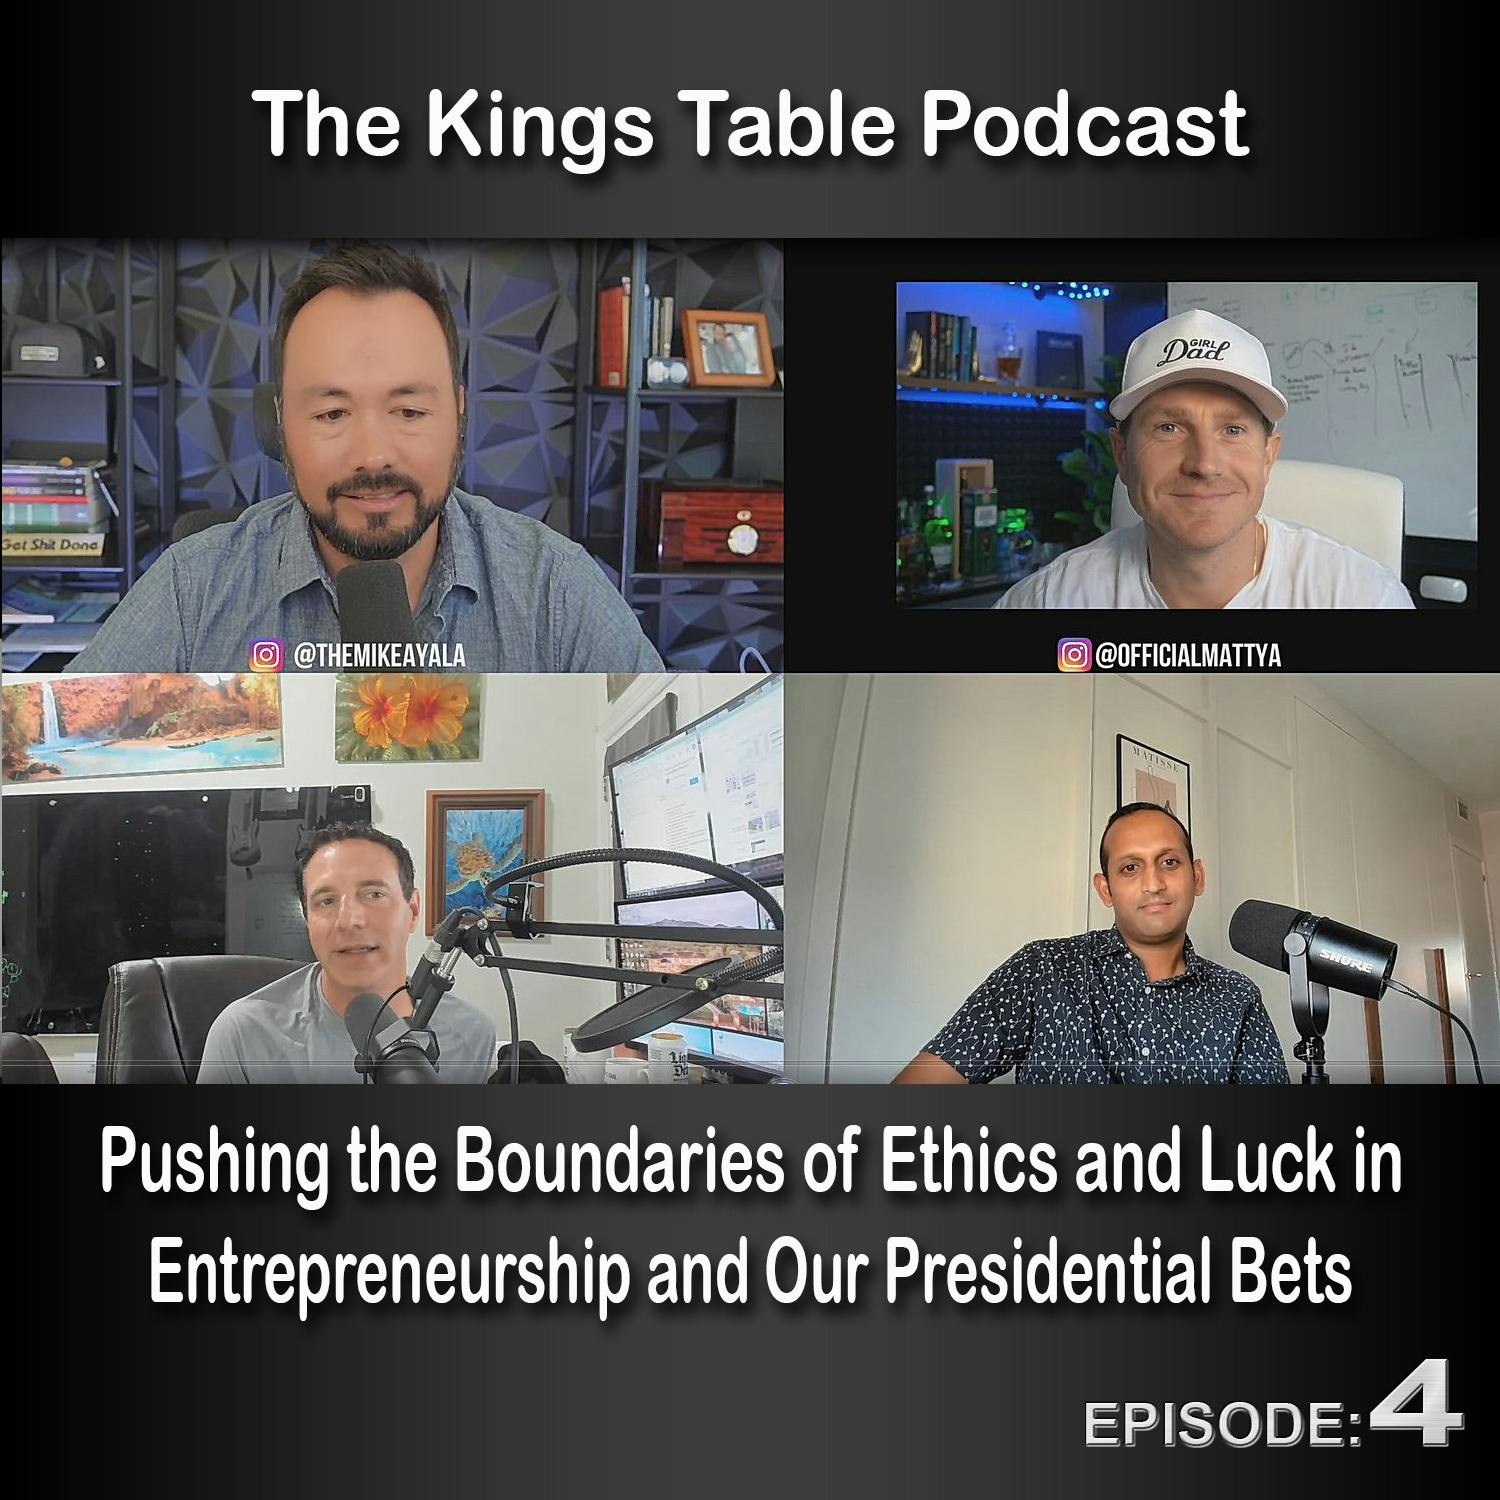 The Kings Table Episode 4: Pushing the Boundaries of Ethics and Luck in Entrepreneurship and Our Presidential Bets